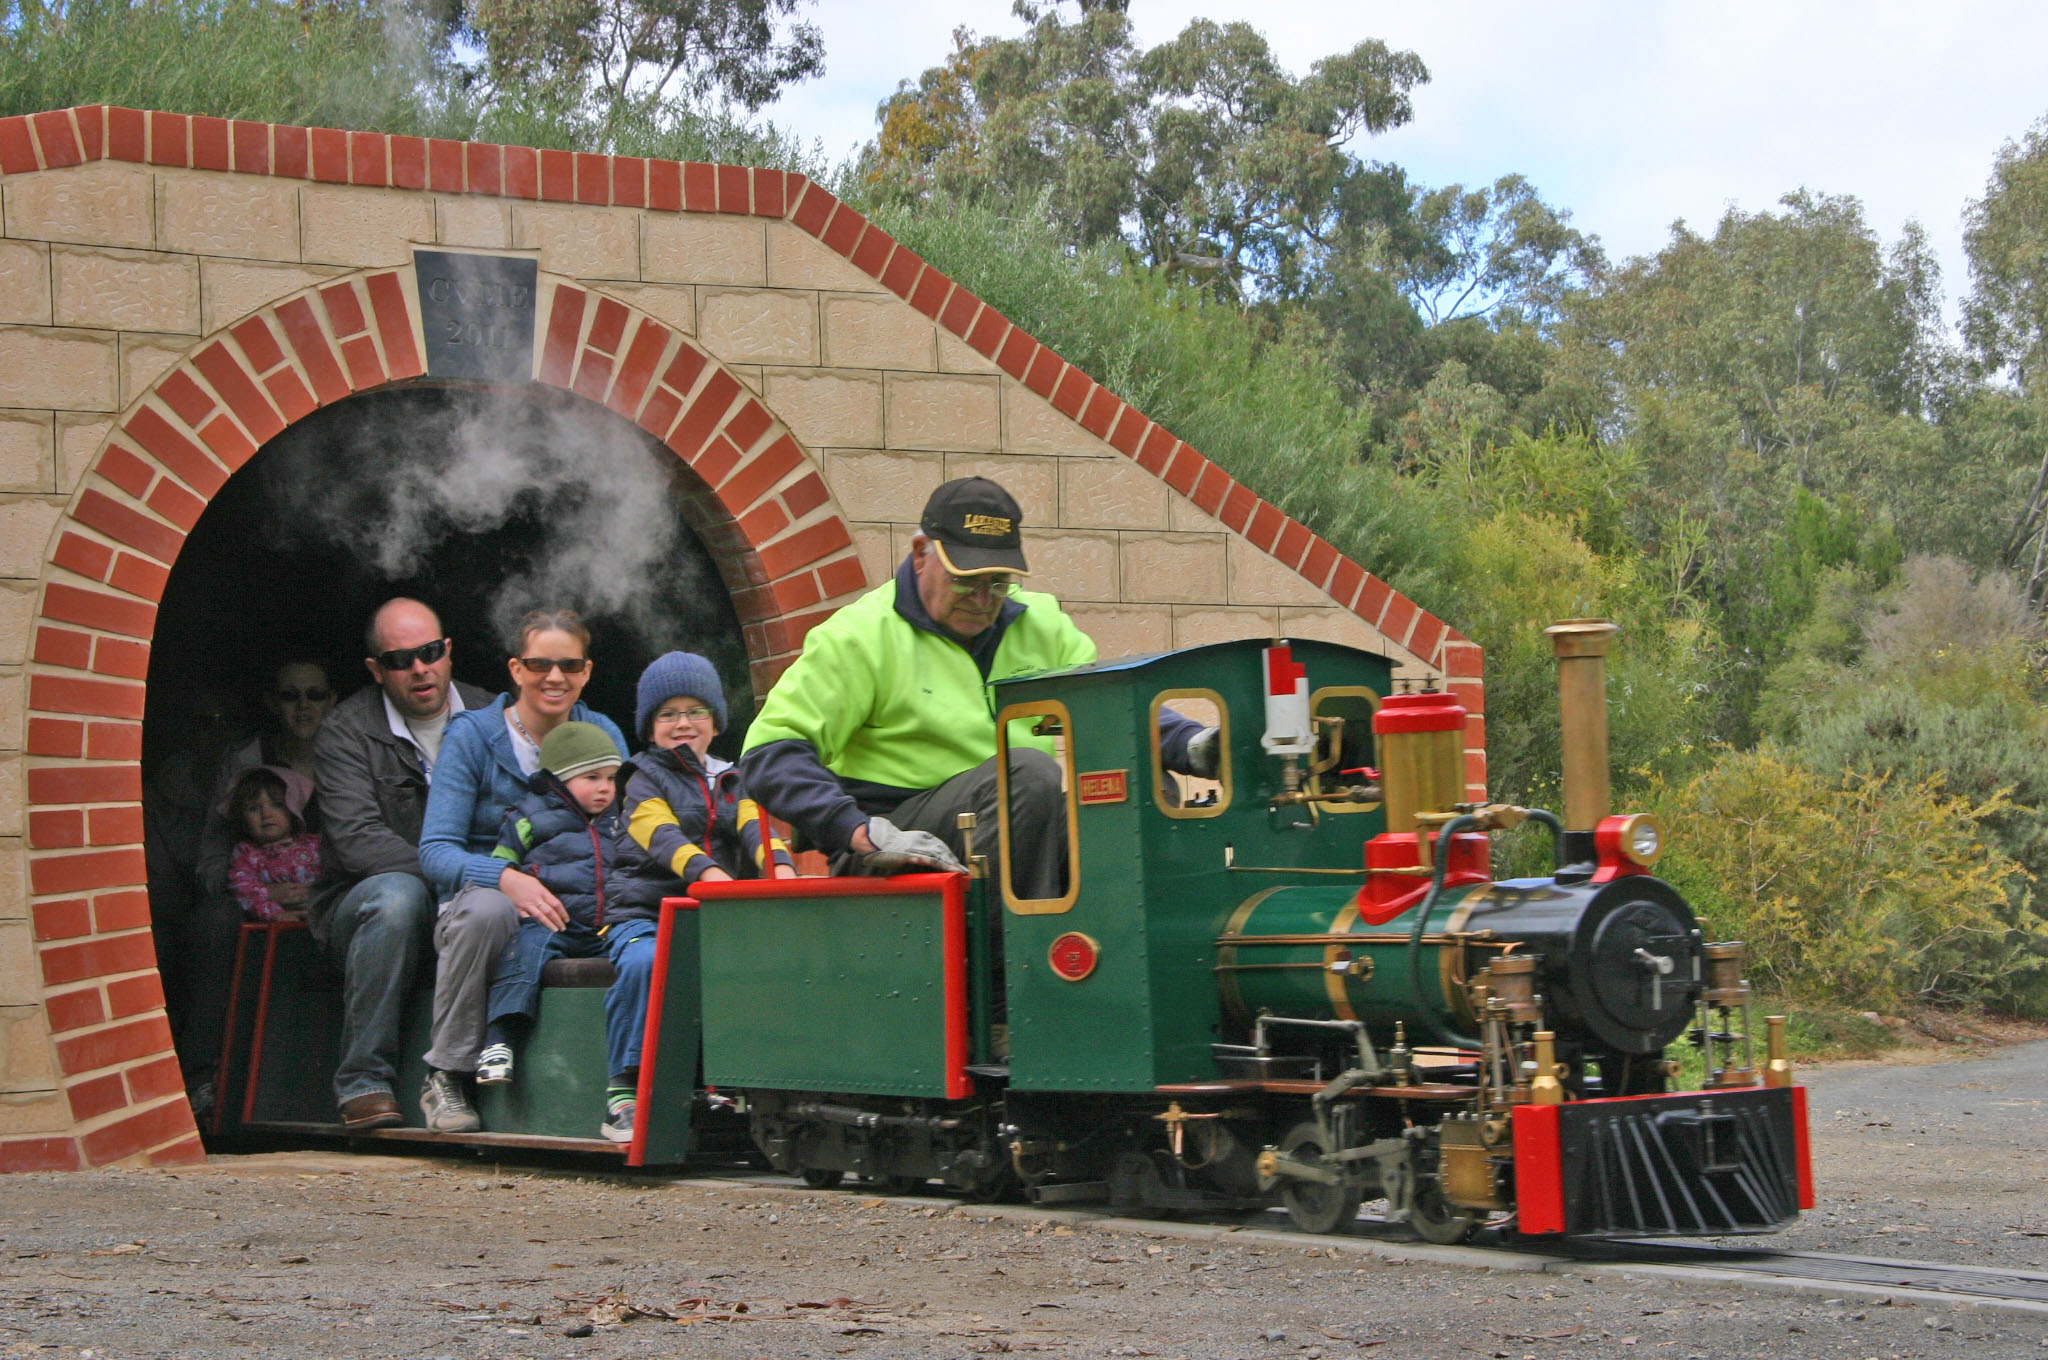 Clare Valley Model Trains